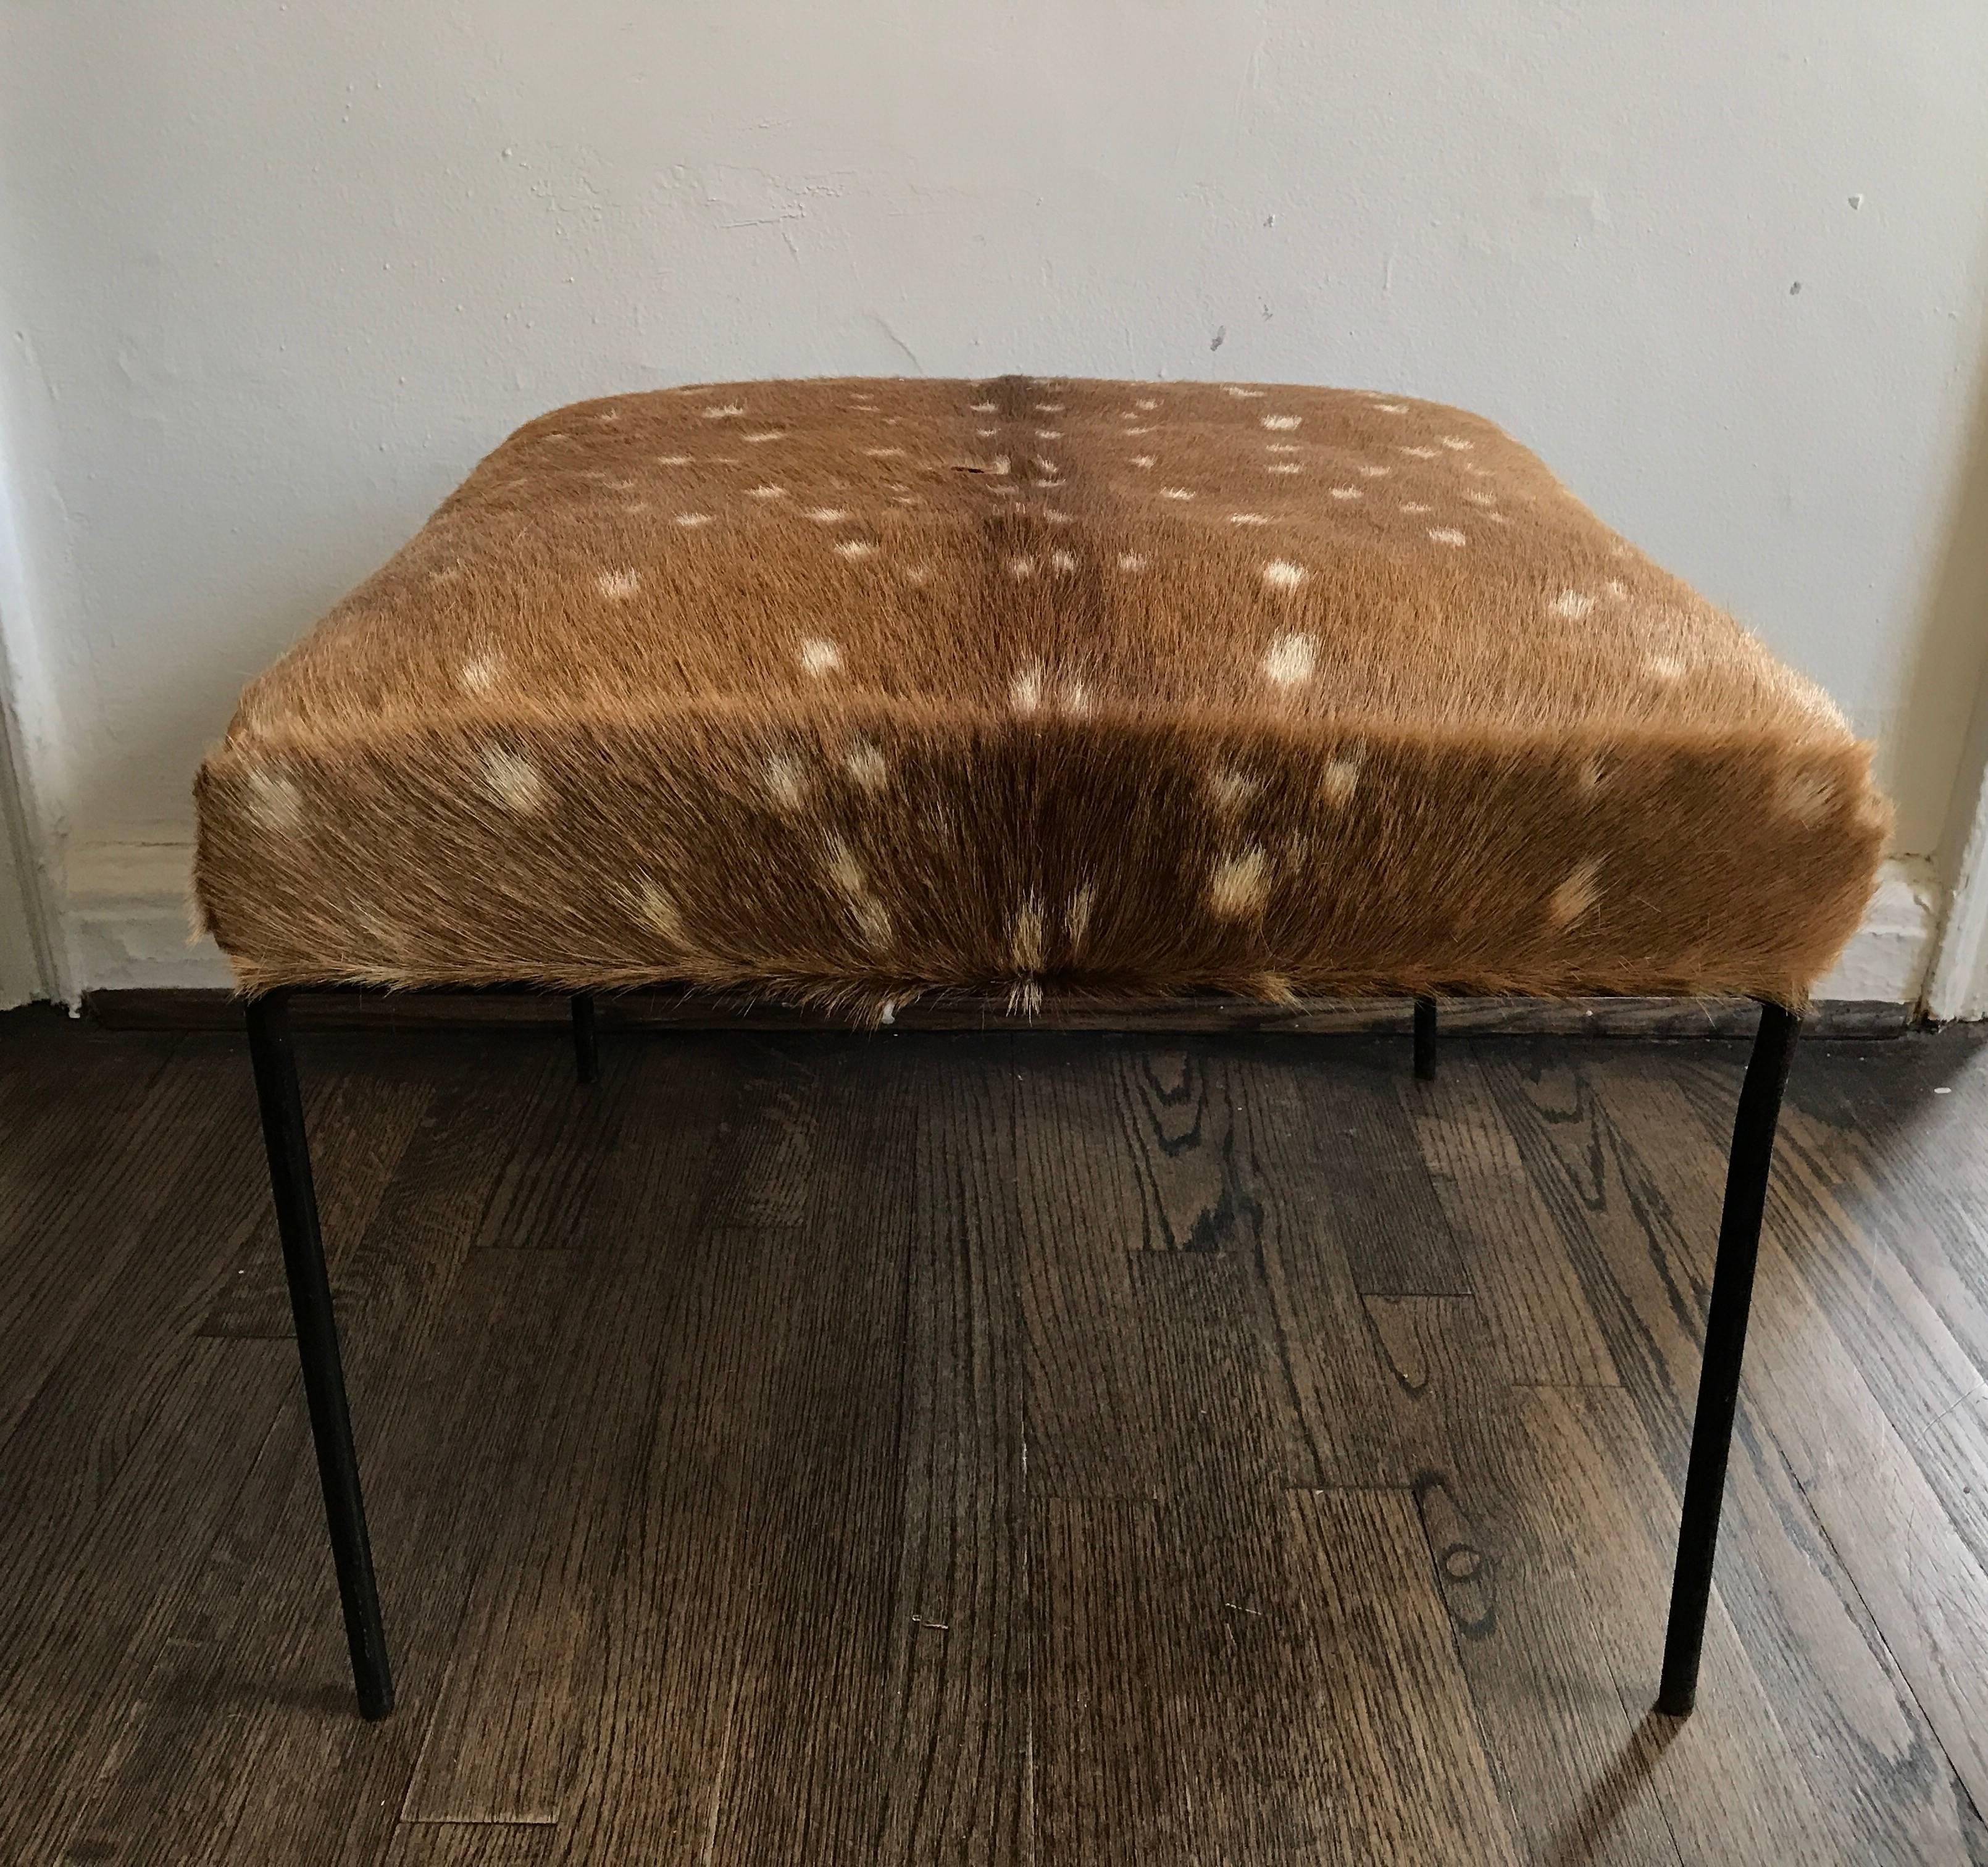 Wrought iron square stool by Paul McCobb upholstered in vintage spotted deer hide.